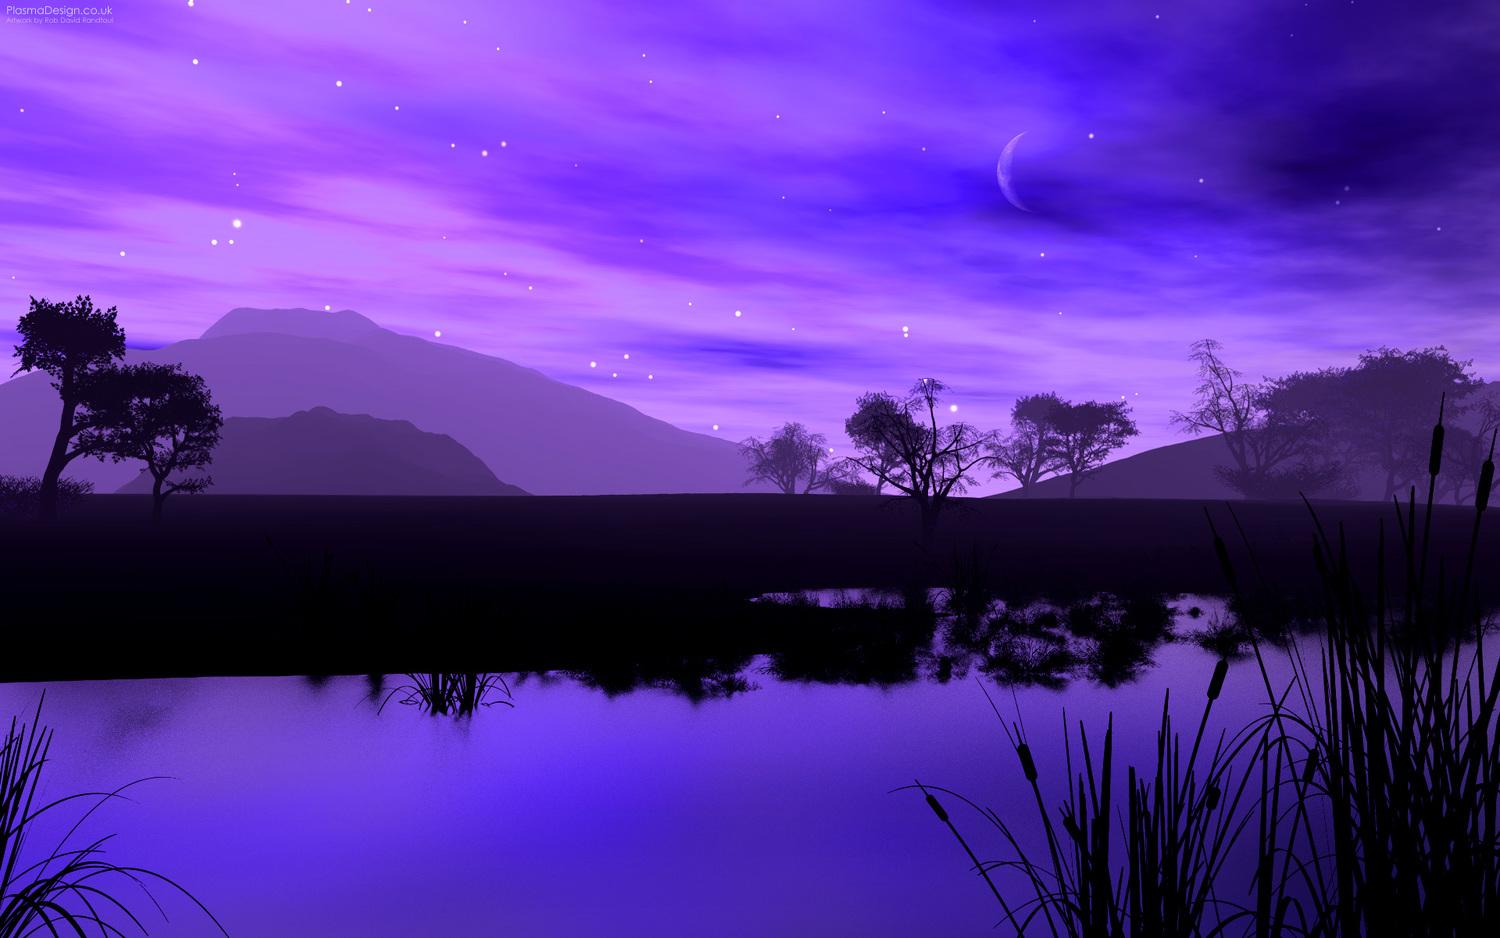 Anime city photo with blue and purple colors 4K wallpaper download